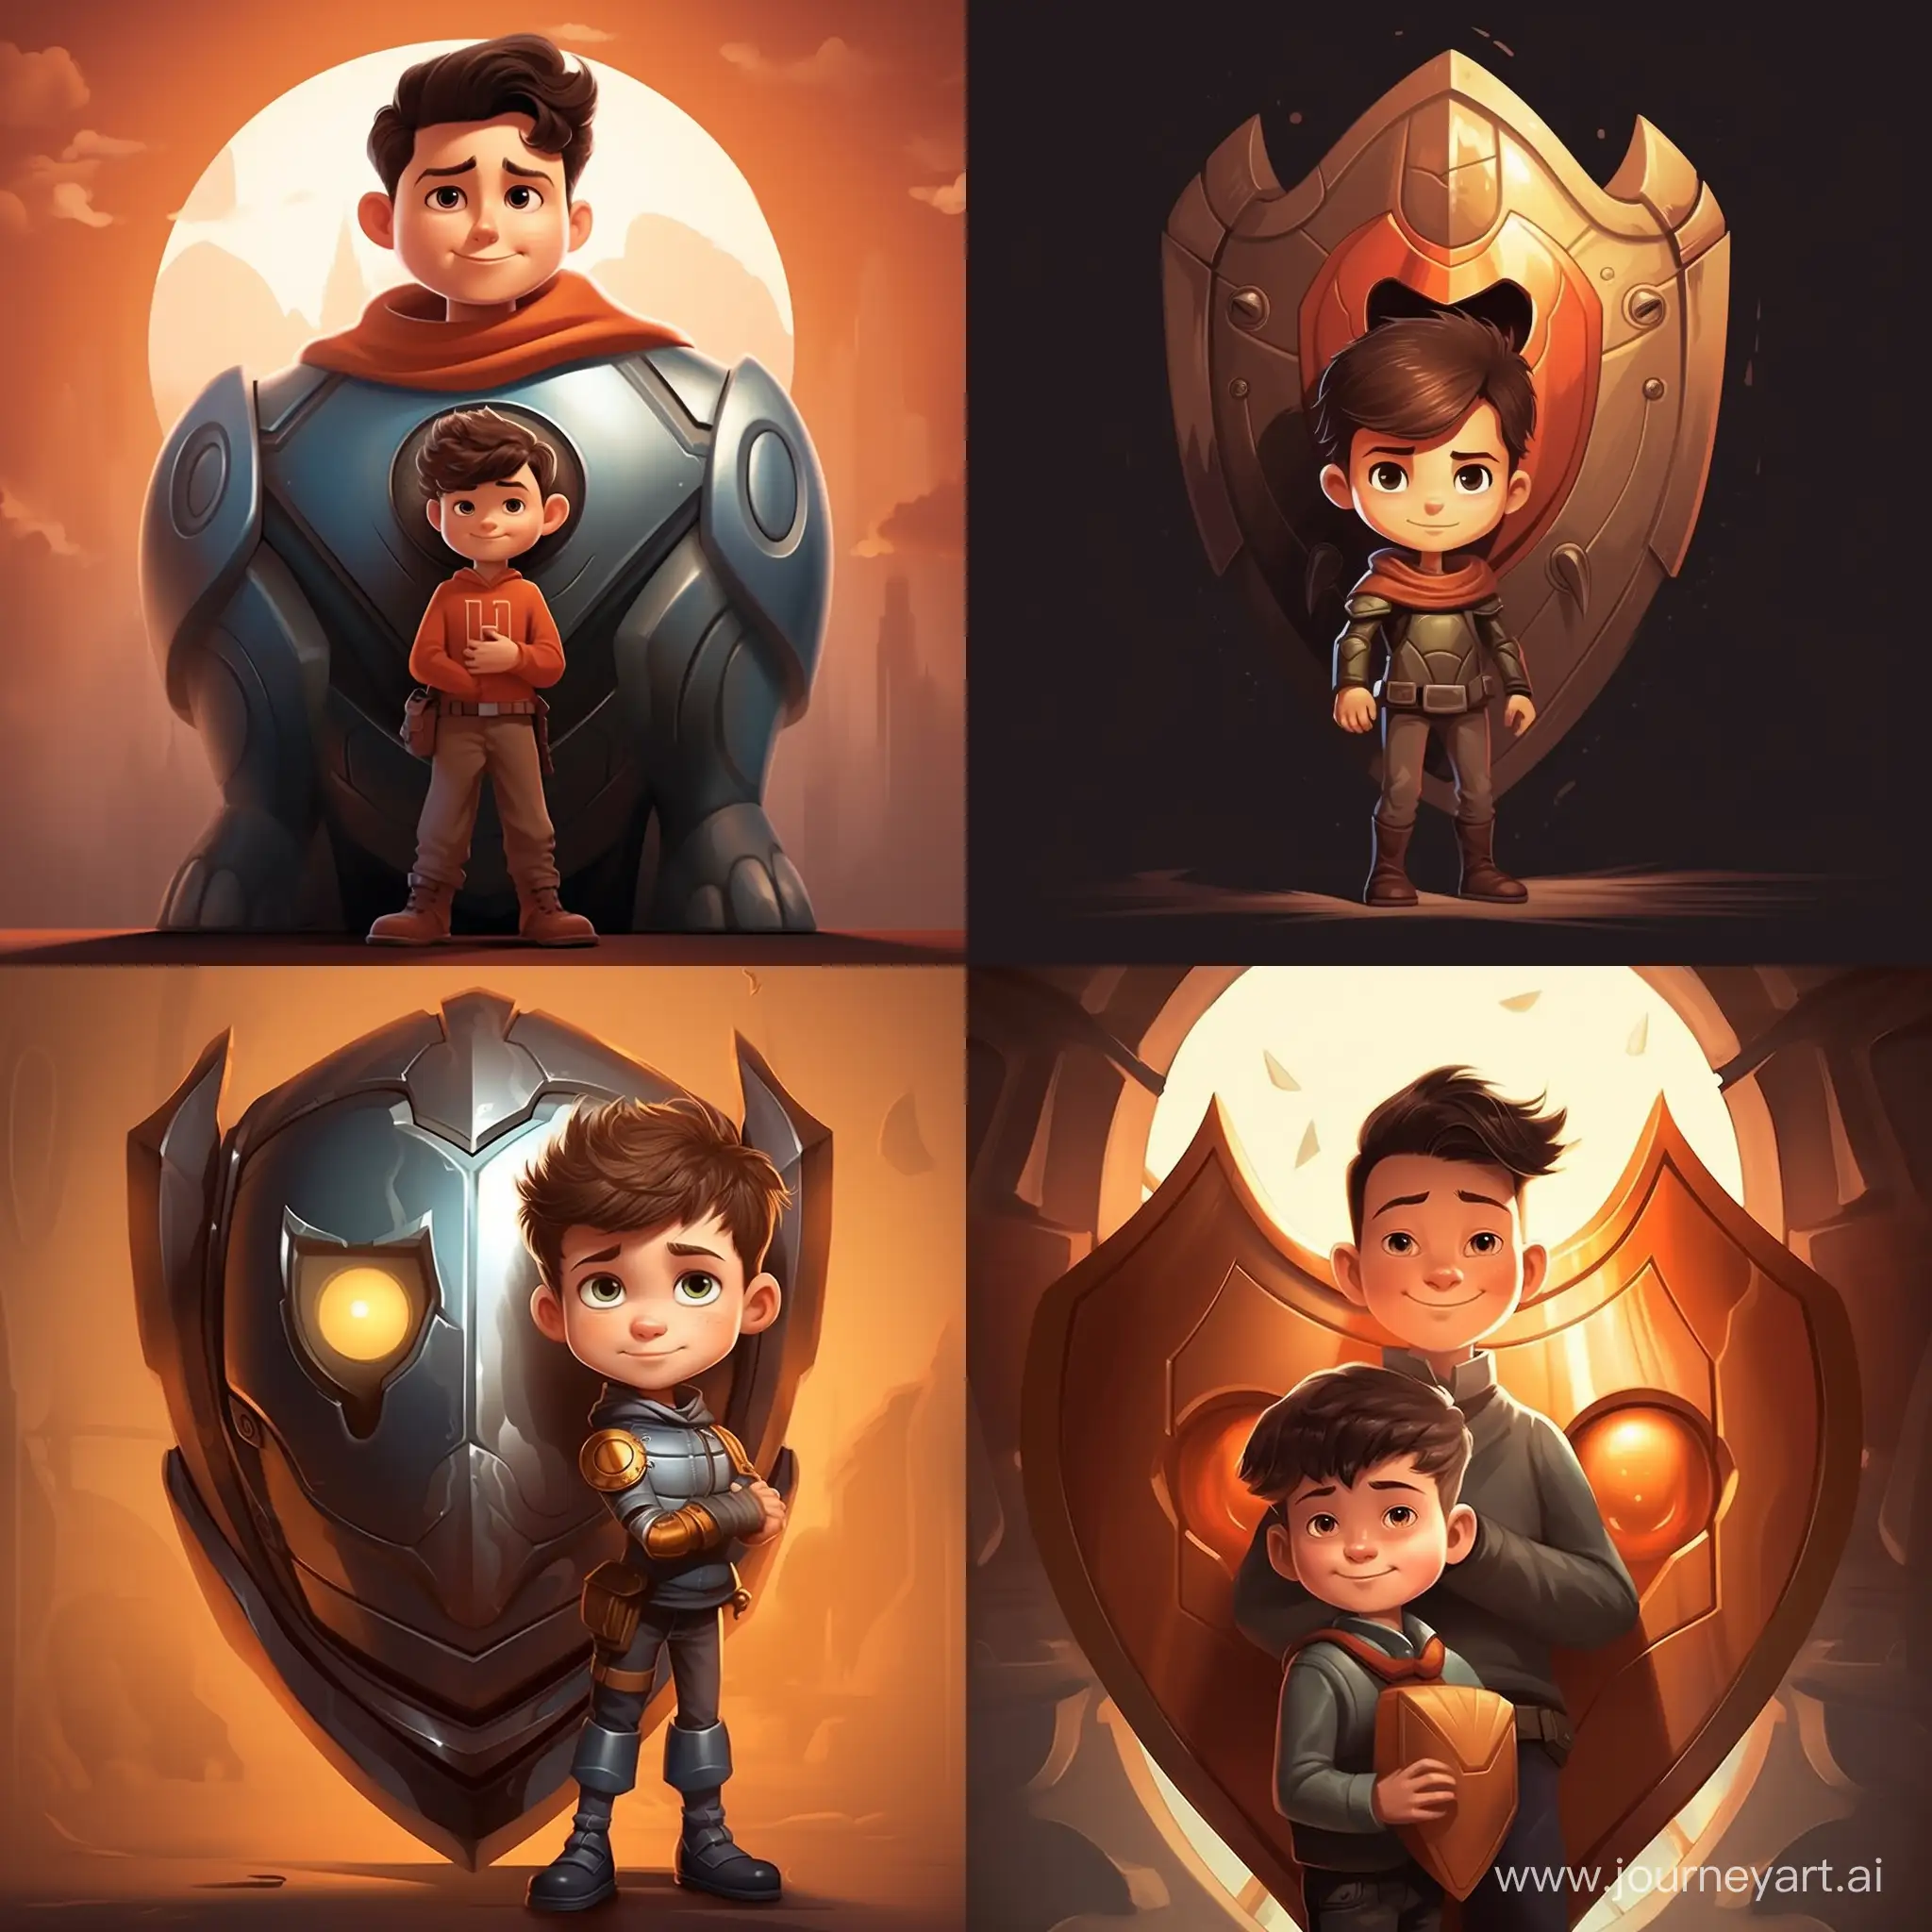 Create a design featuring a strong and friendly character representing the "Big Brother" figure protecting a smaller character symbolizing the "Little Brother." Incorporate security elements like a shield or lock to convey protection